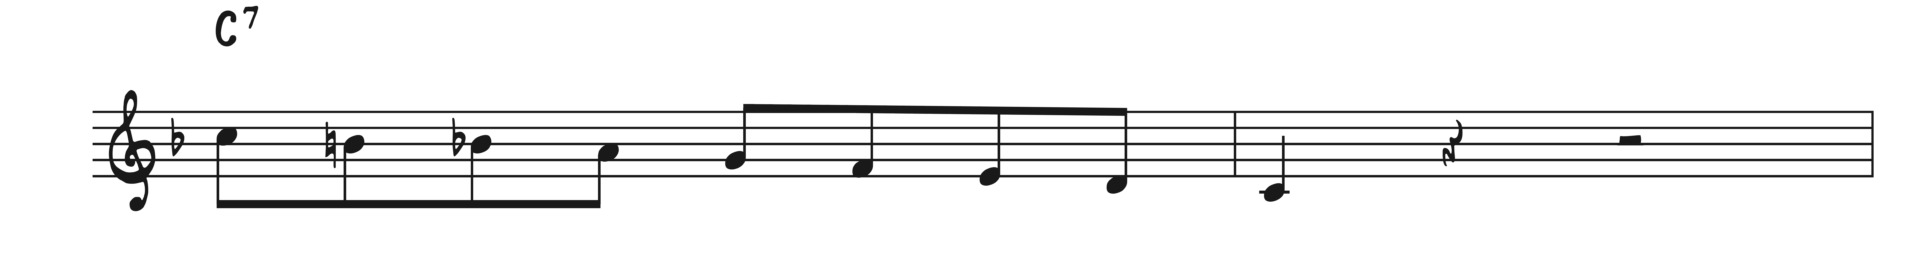 Dominant 7th Bebop scale